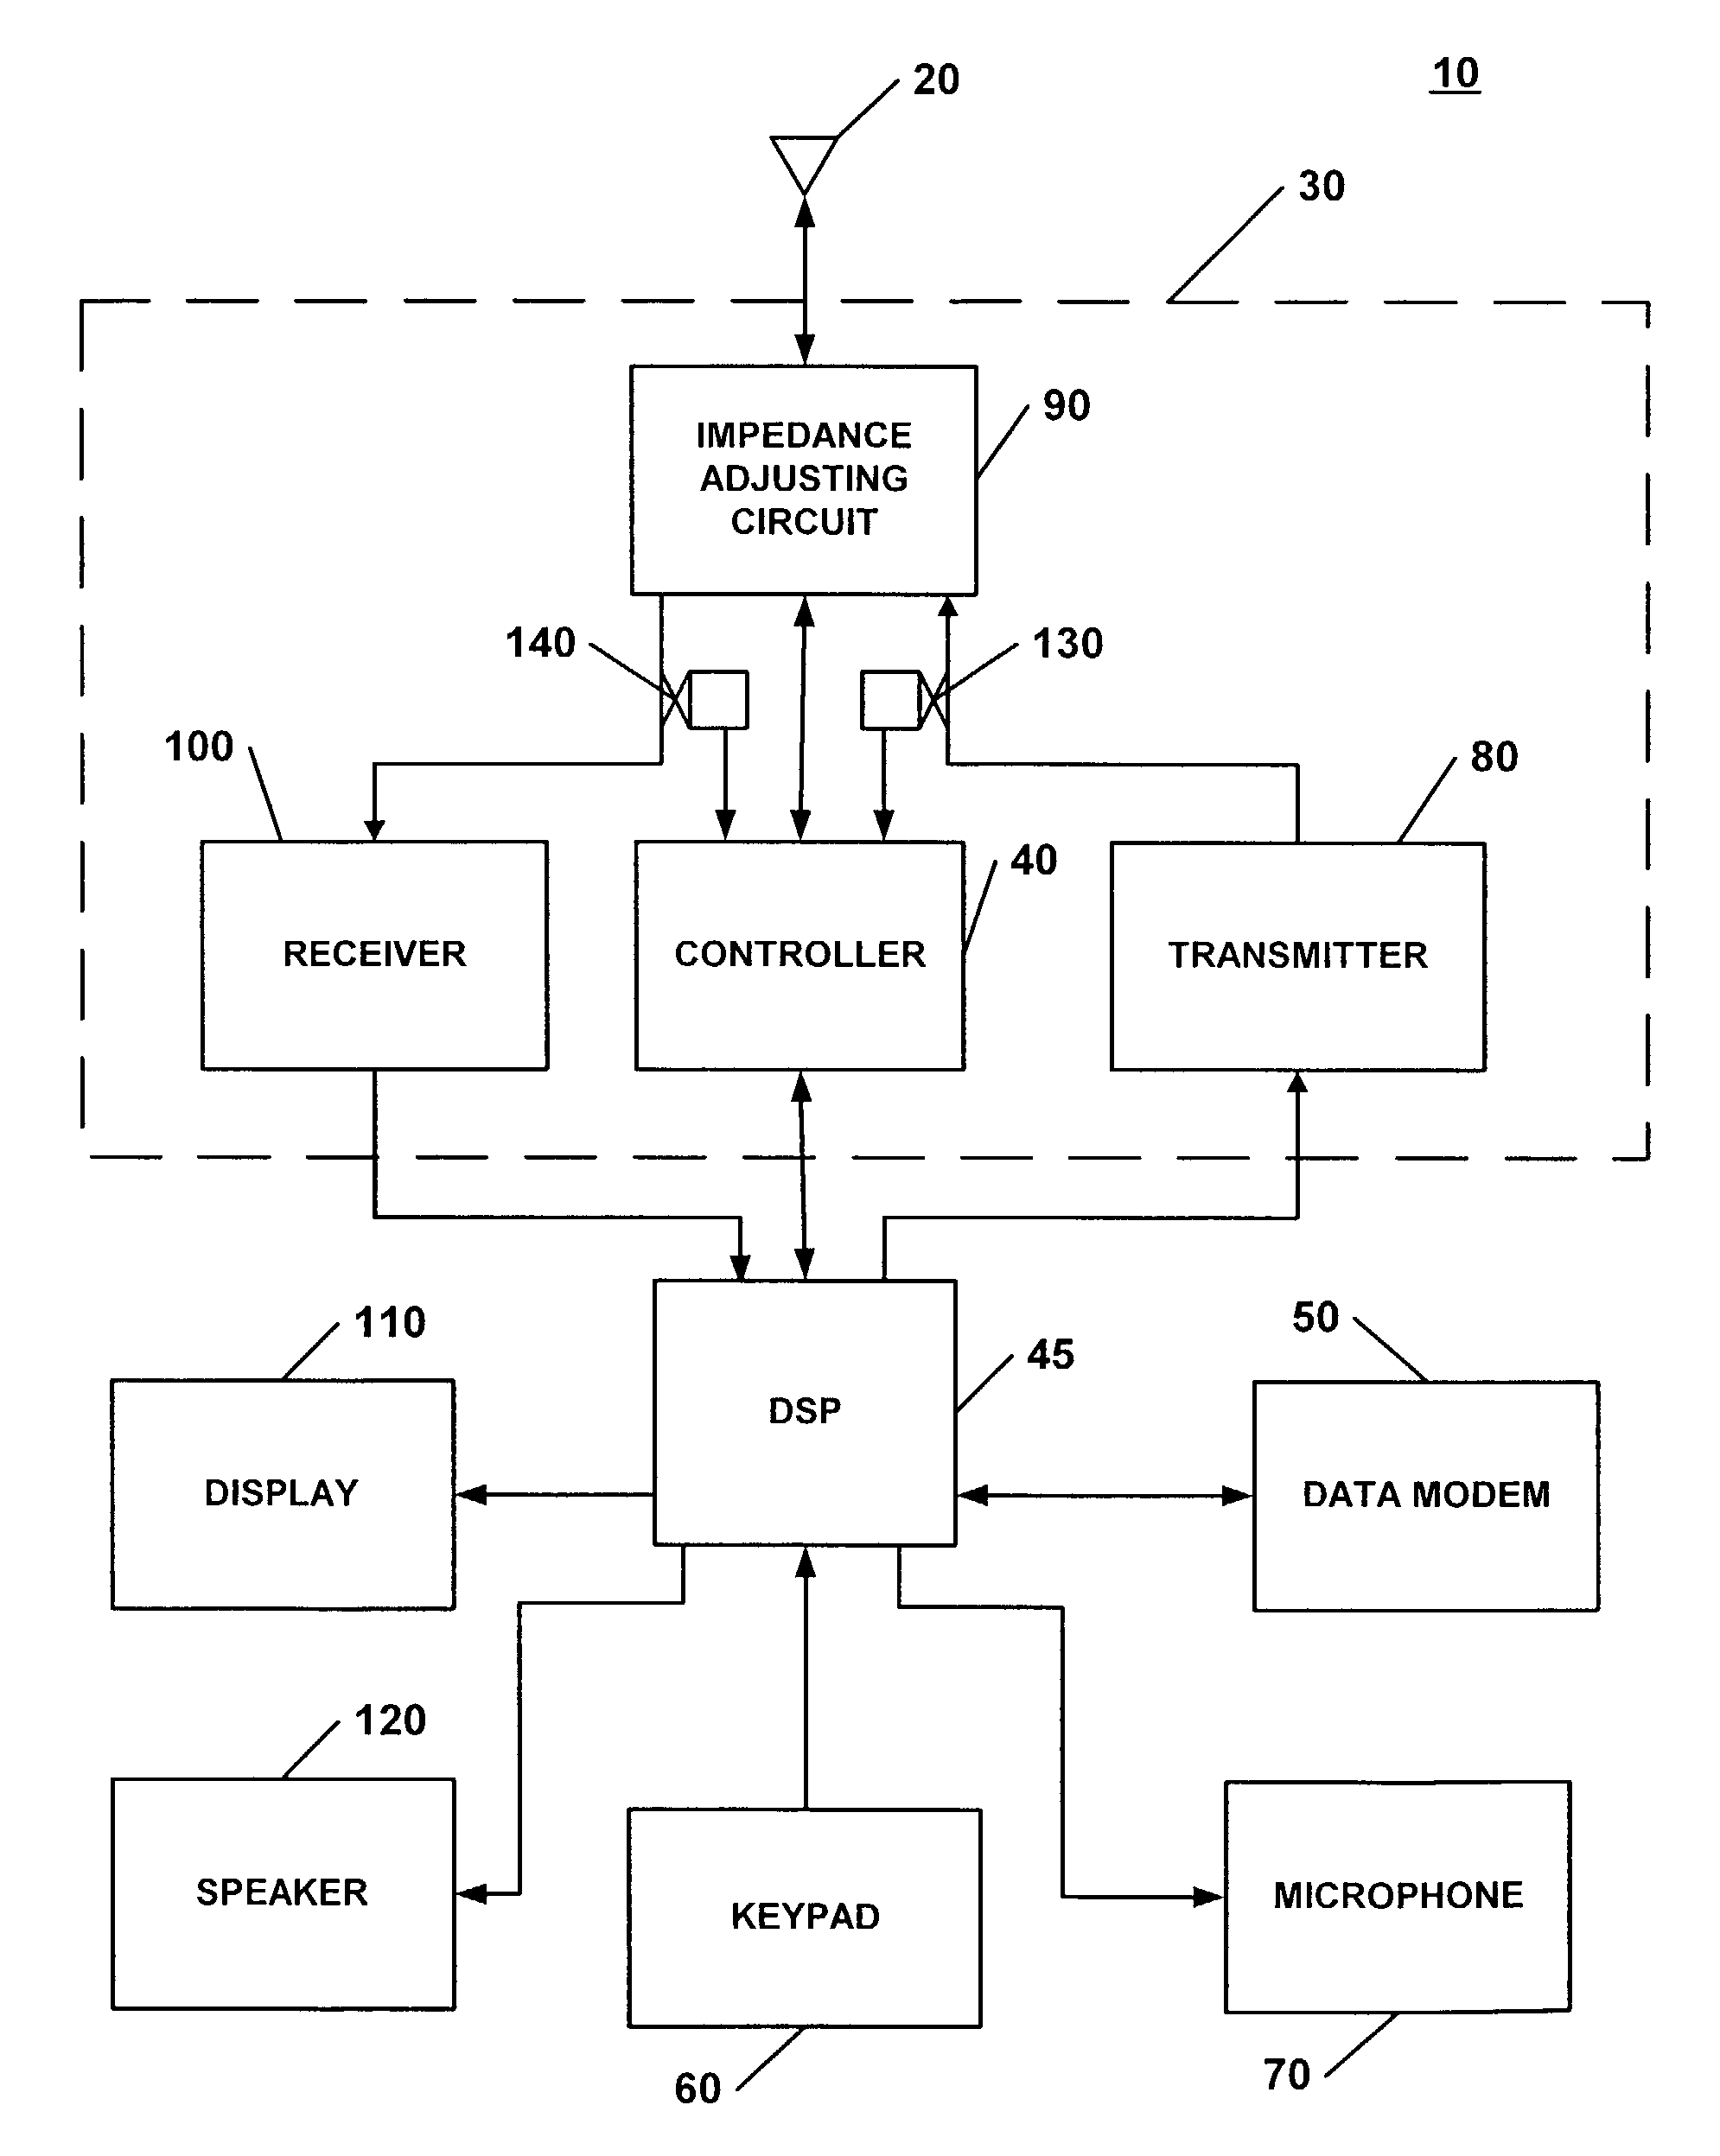 Apparatus and methods for tuning antenna impedance using transmitter and receiver parameters